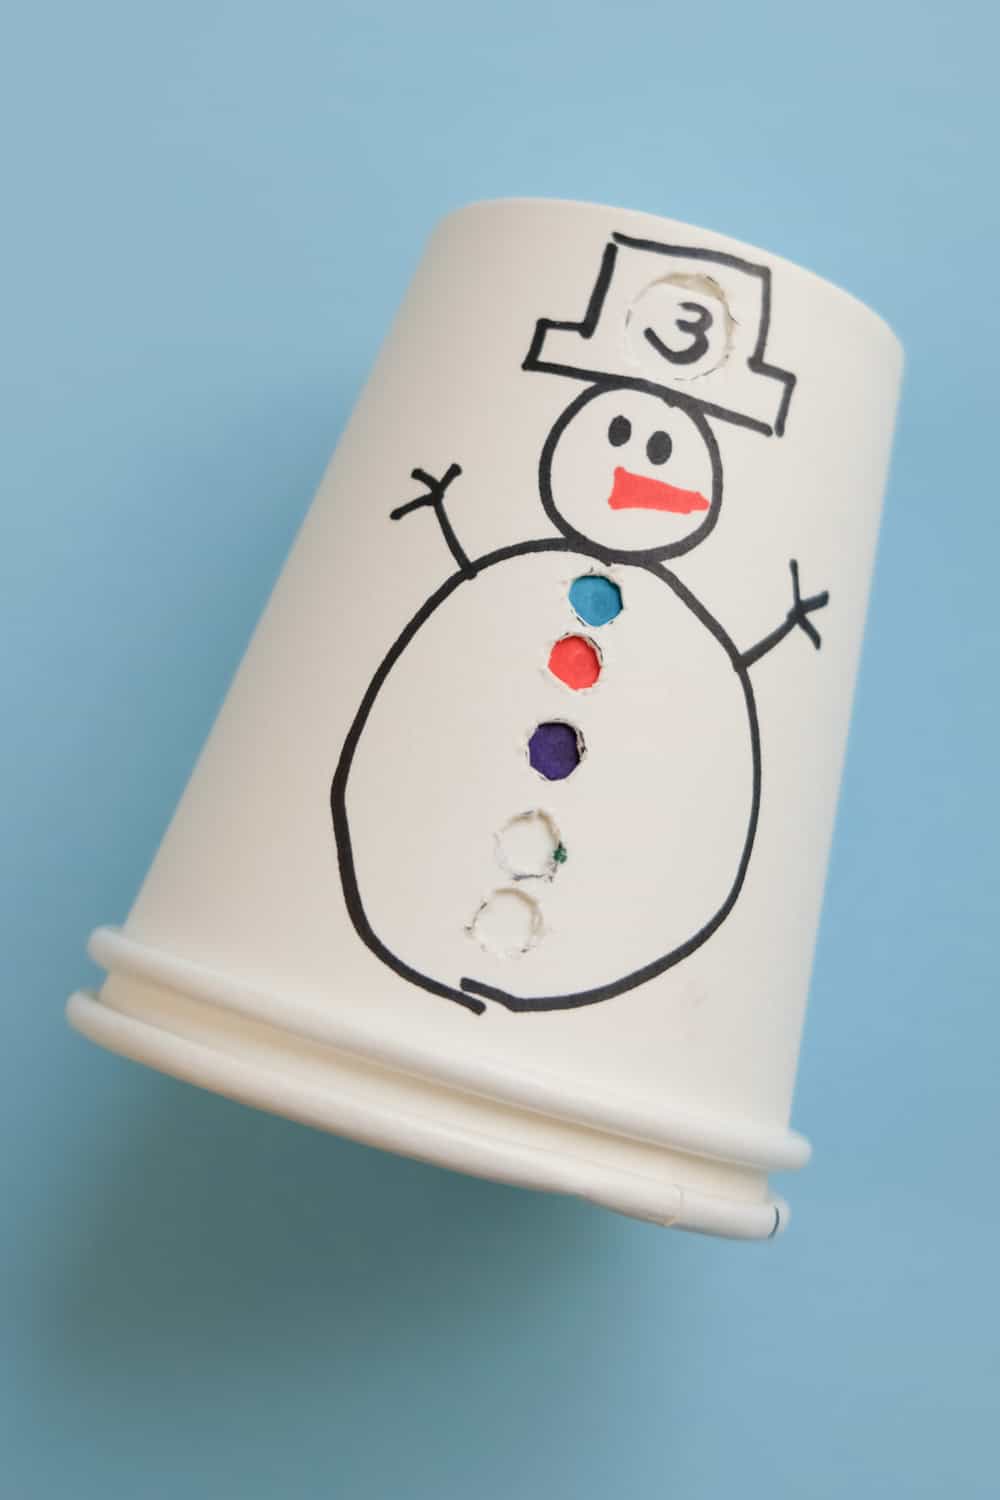 Toddlers are going to have so much fun learning how to count from 1 to 5 with this DIY paper cup snowman!